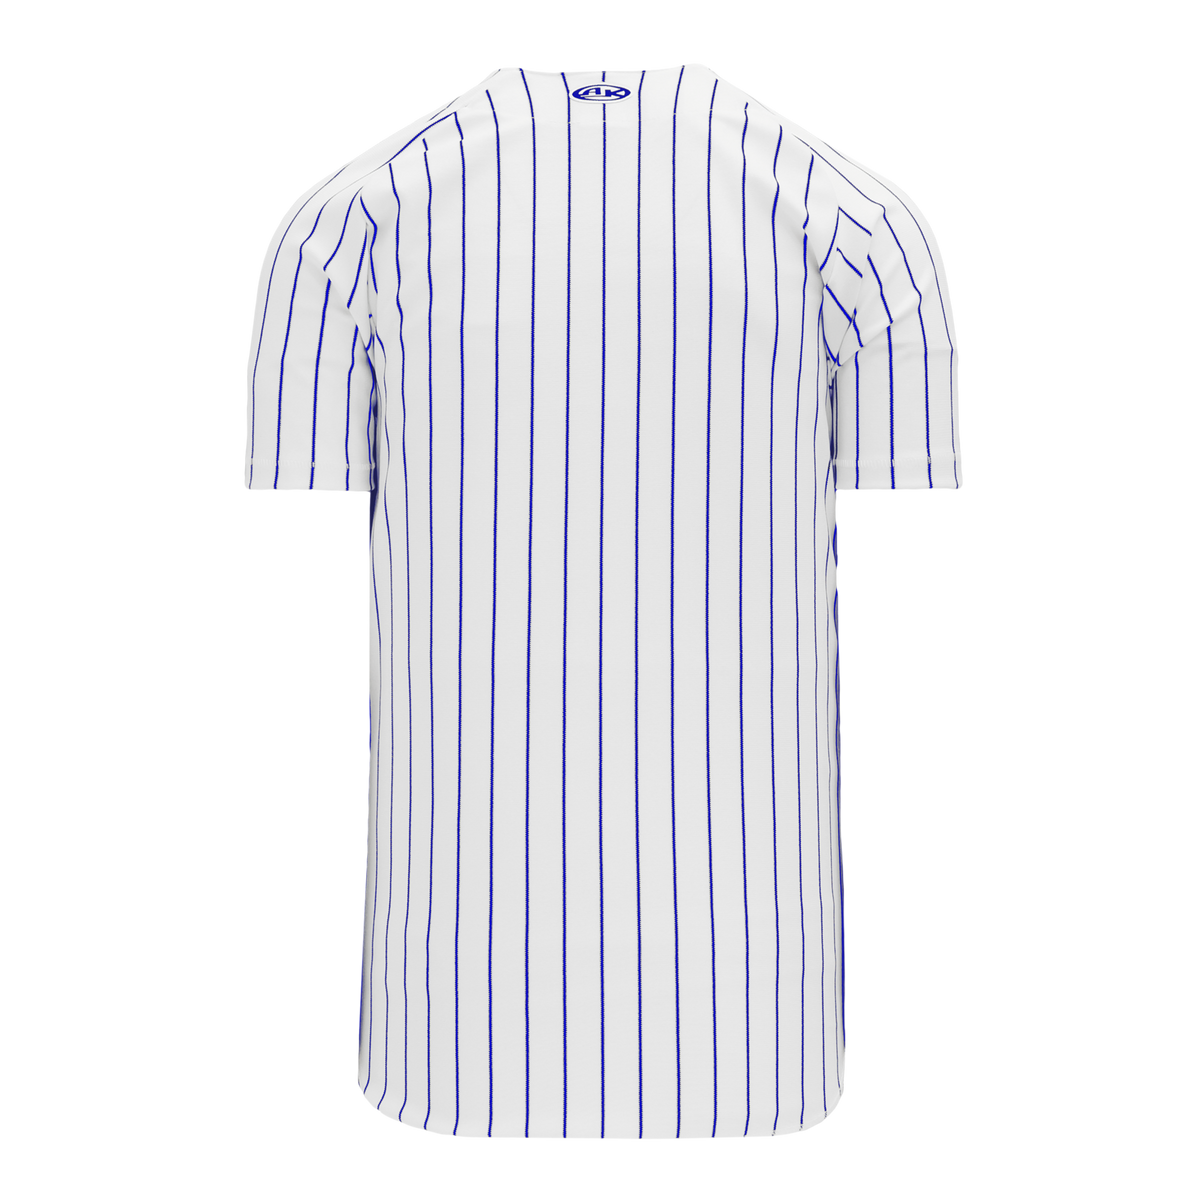  Customized Shirt Black/Red Baseball Jersey Pinstripe Custom  Shirts Design Your Own Name & Number for Men/Women/Youth : Clothing, Shoes  & Jewelry